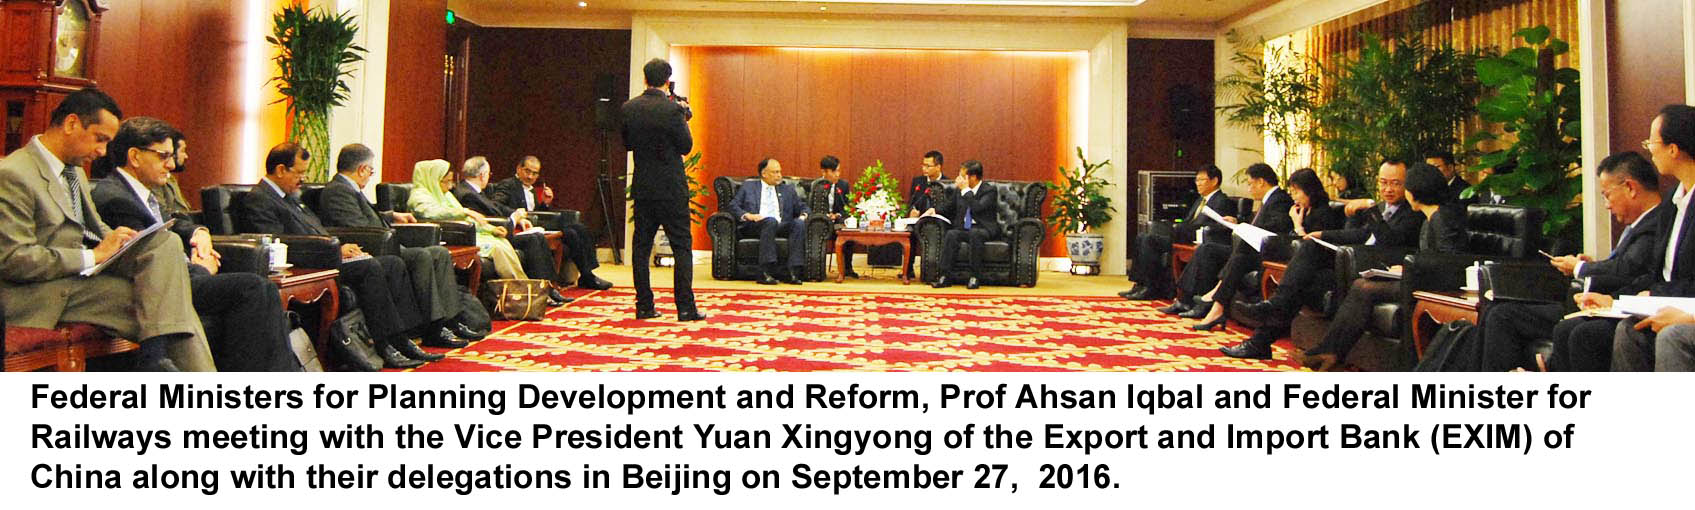 Federal Ministers meeting with the VP of Export & Import bank of China on Sept 27,2016